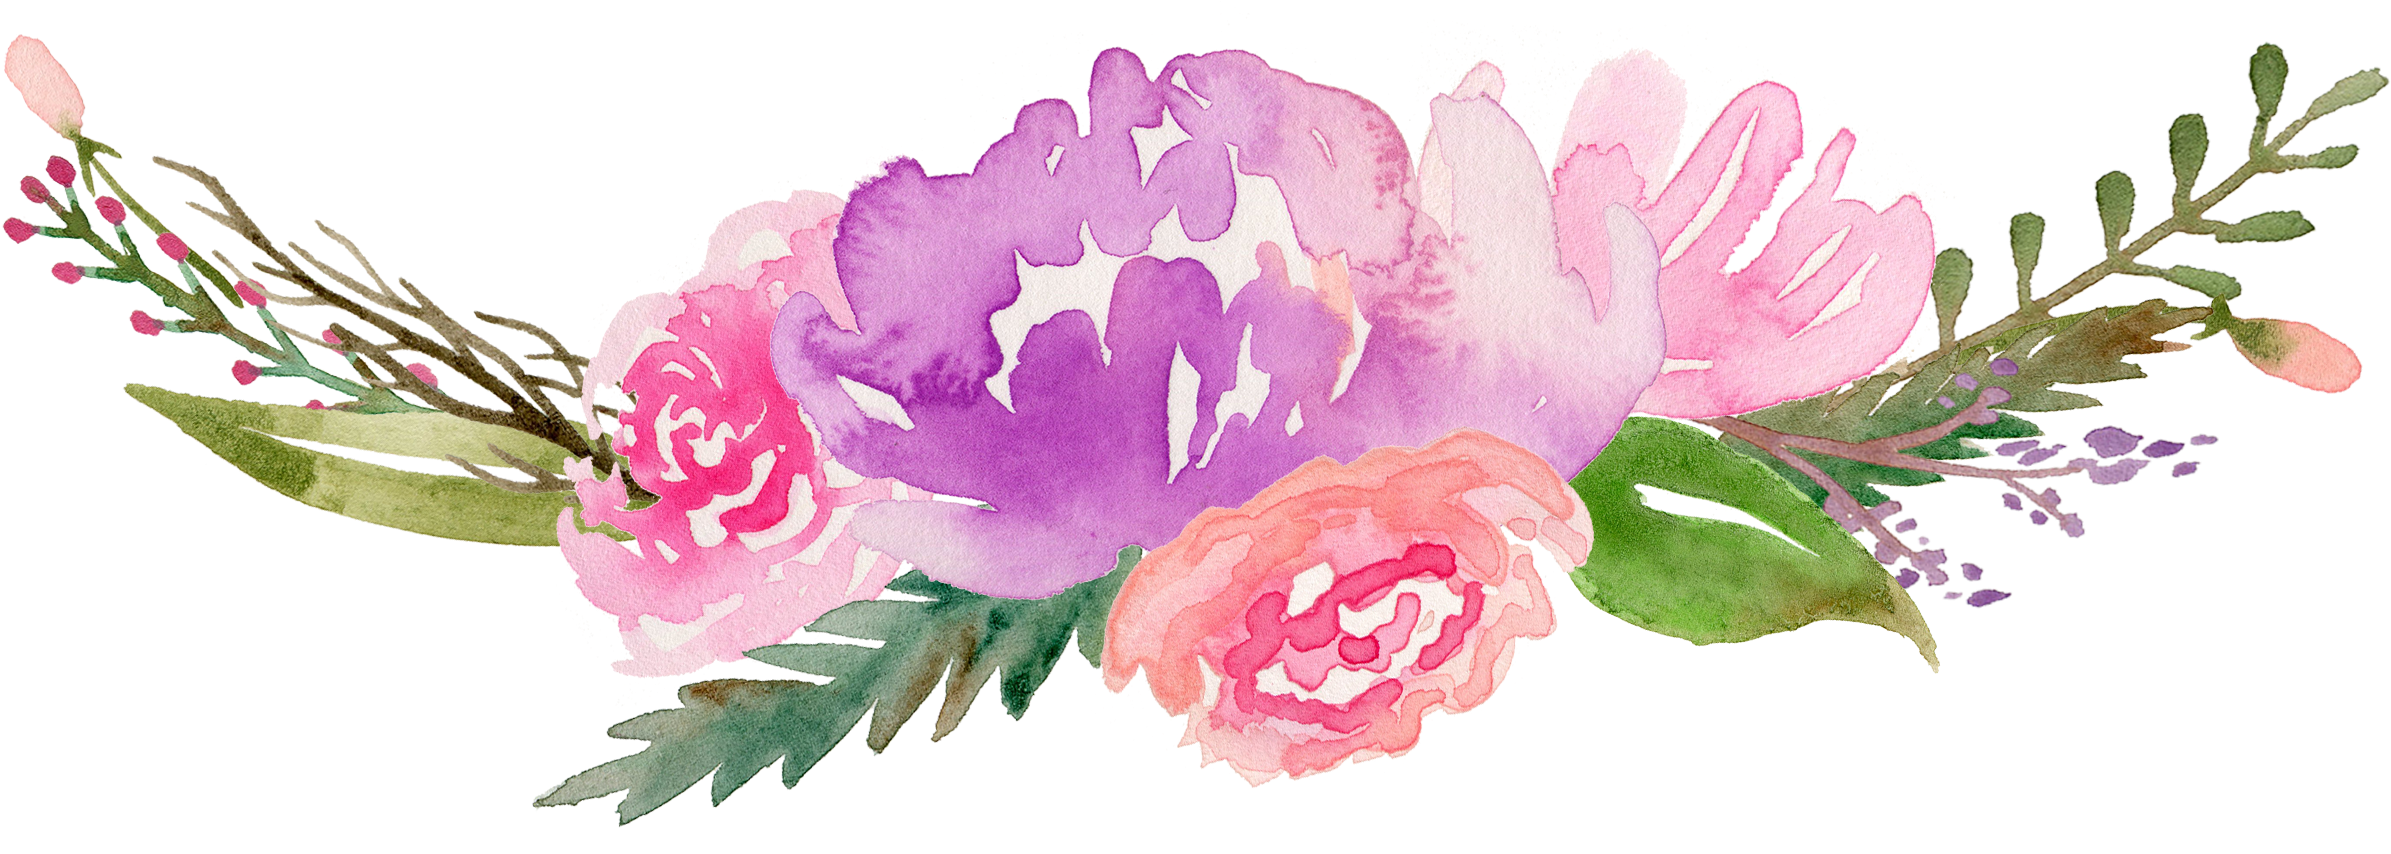 HD Royalty Free Flowers Watercolor Painting Clip Art Along